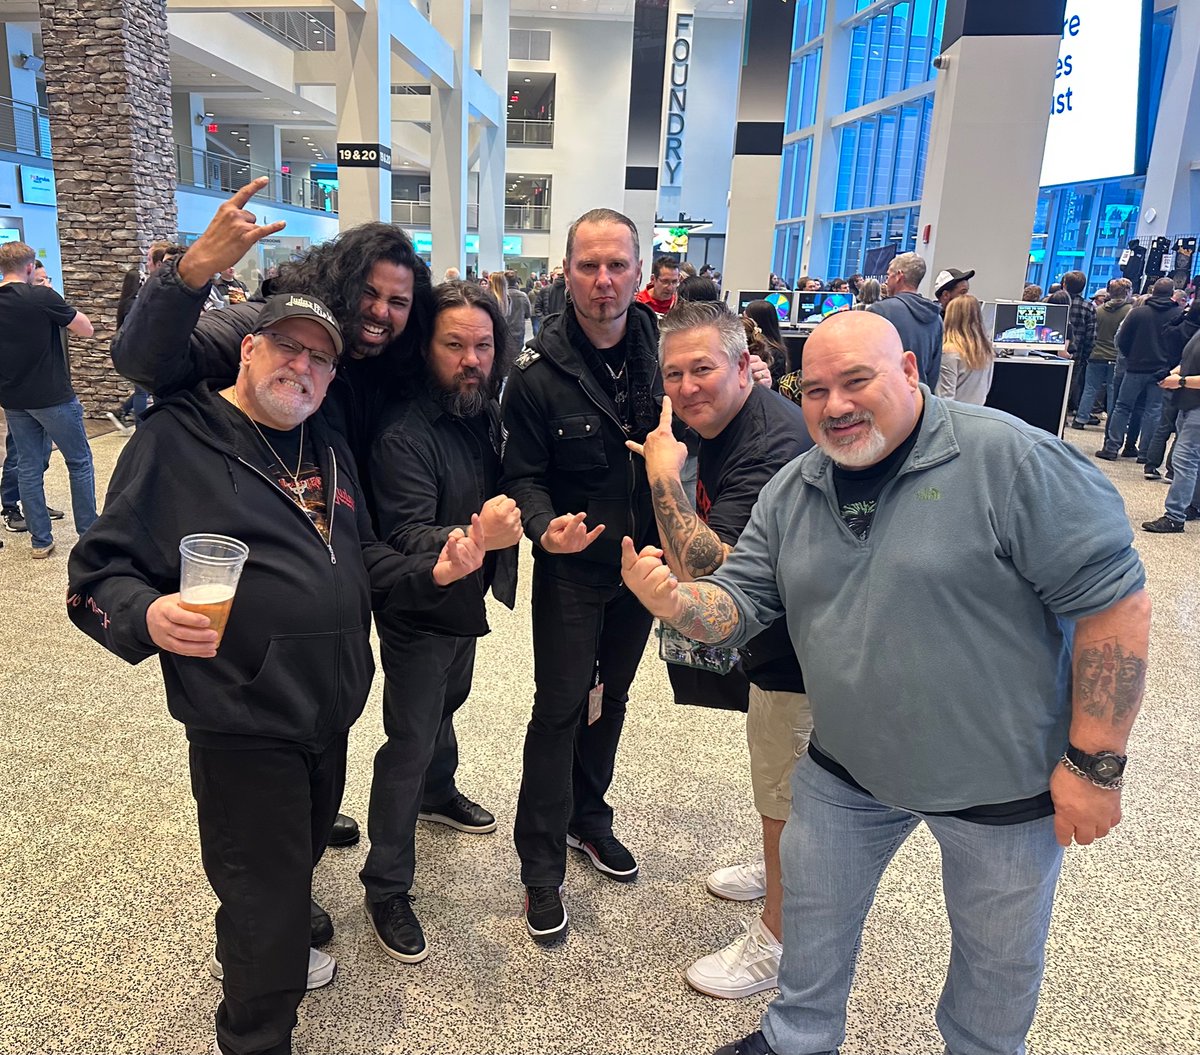 Friday night and the Priest is back. Caught up with my Ultimate Metal Guitar Retreat dudes prior to JP in Newark, NJ. Great time. We are all looking to this year’s retreat (October) as it will be a big step forward for the event. More smoke, more amps, more Metal!